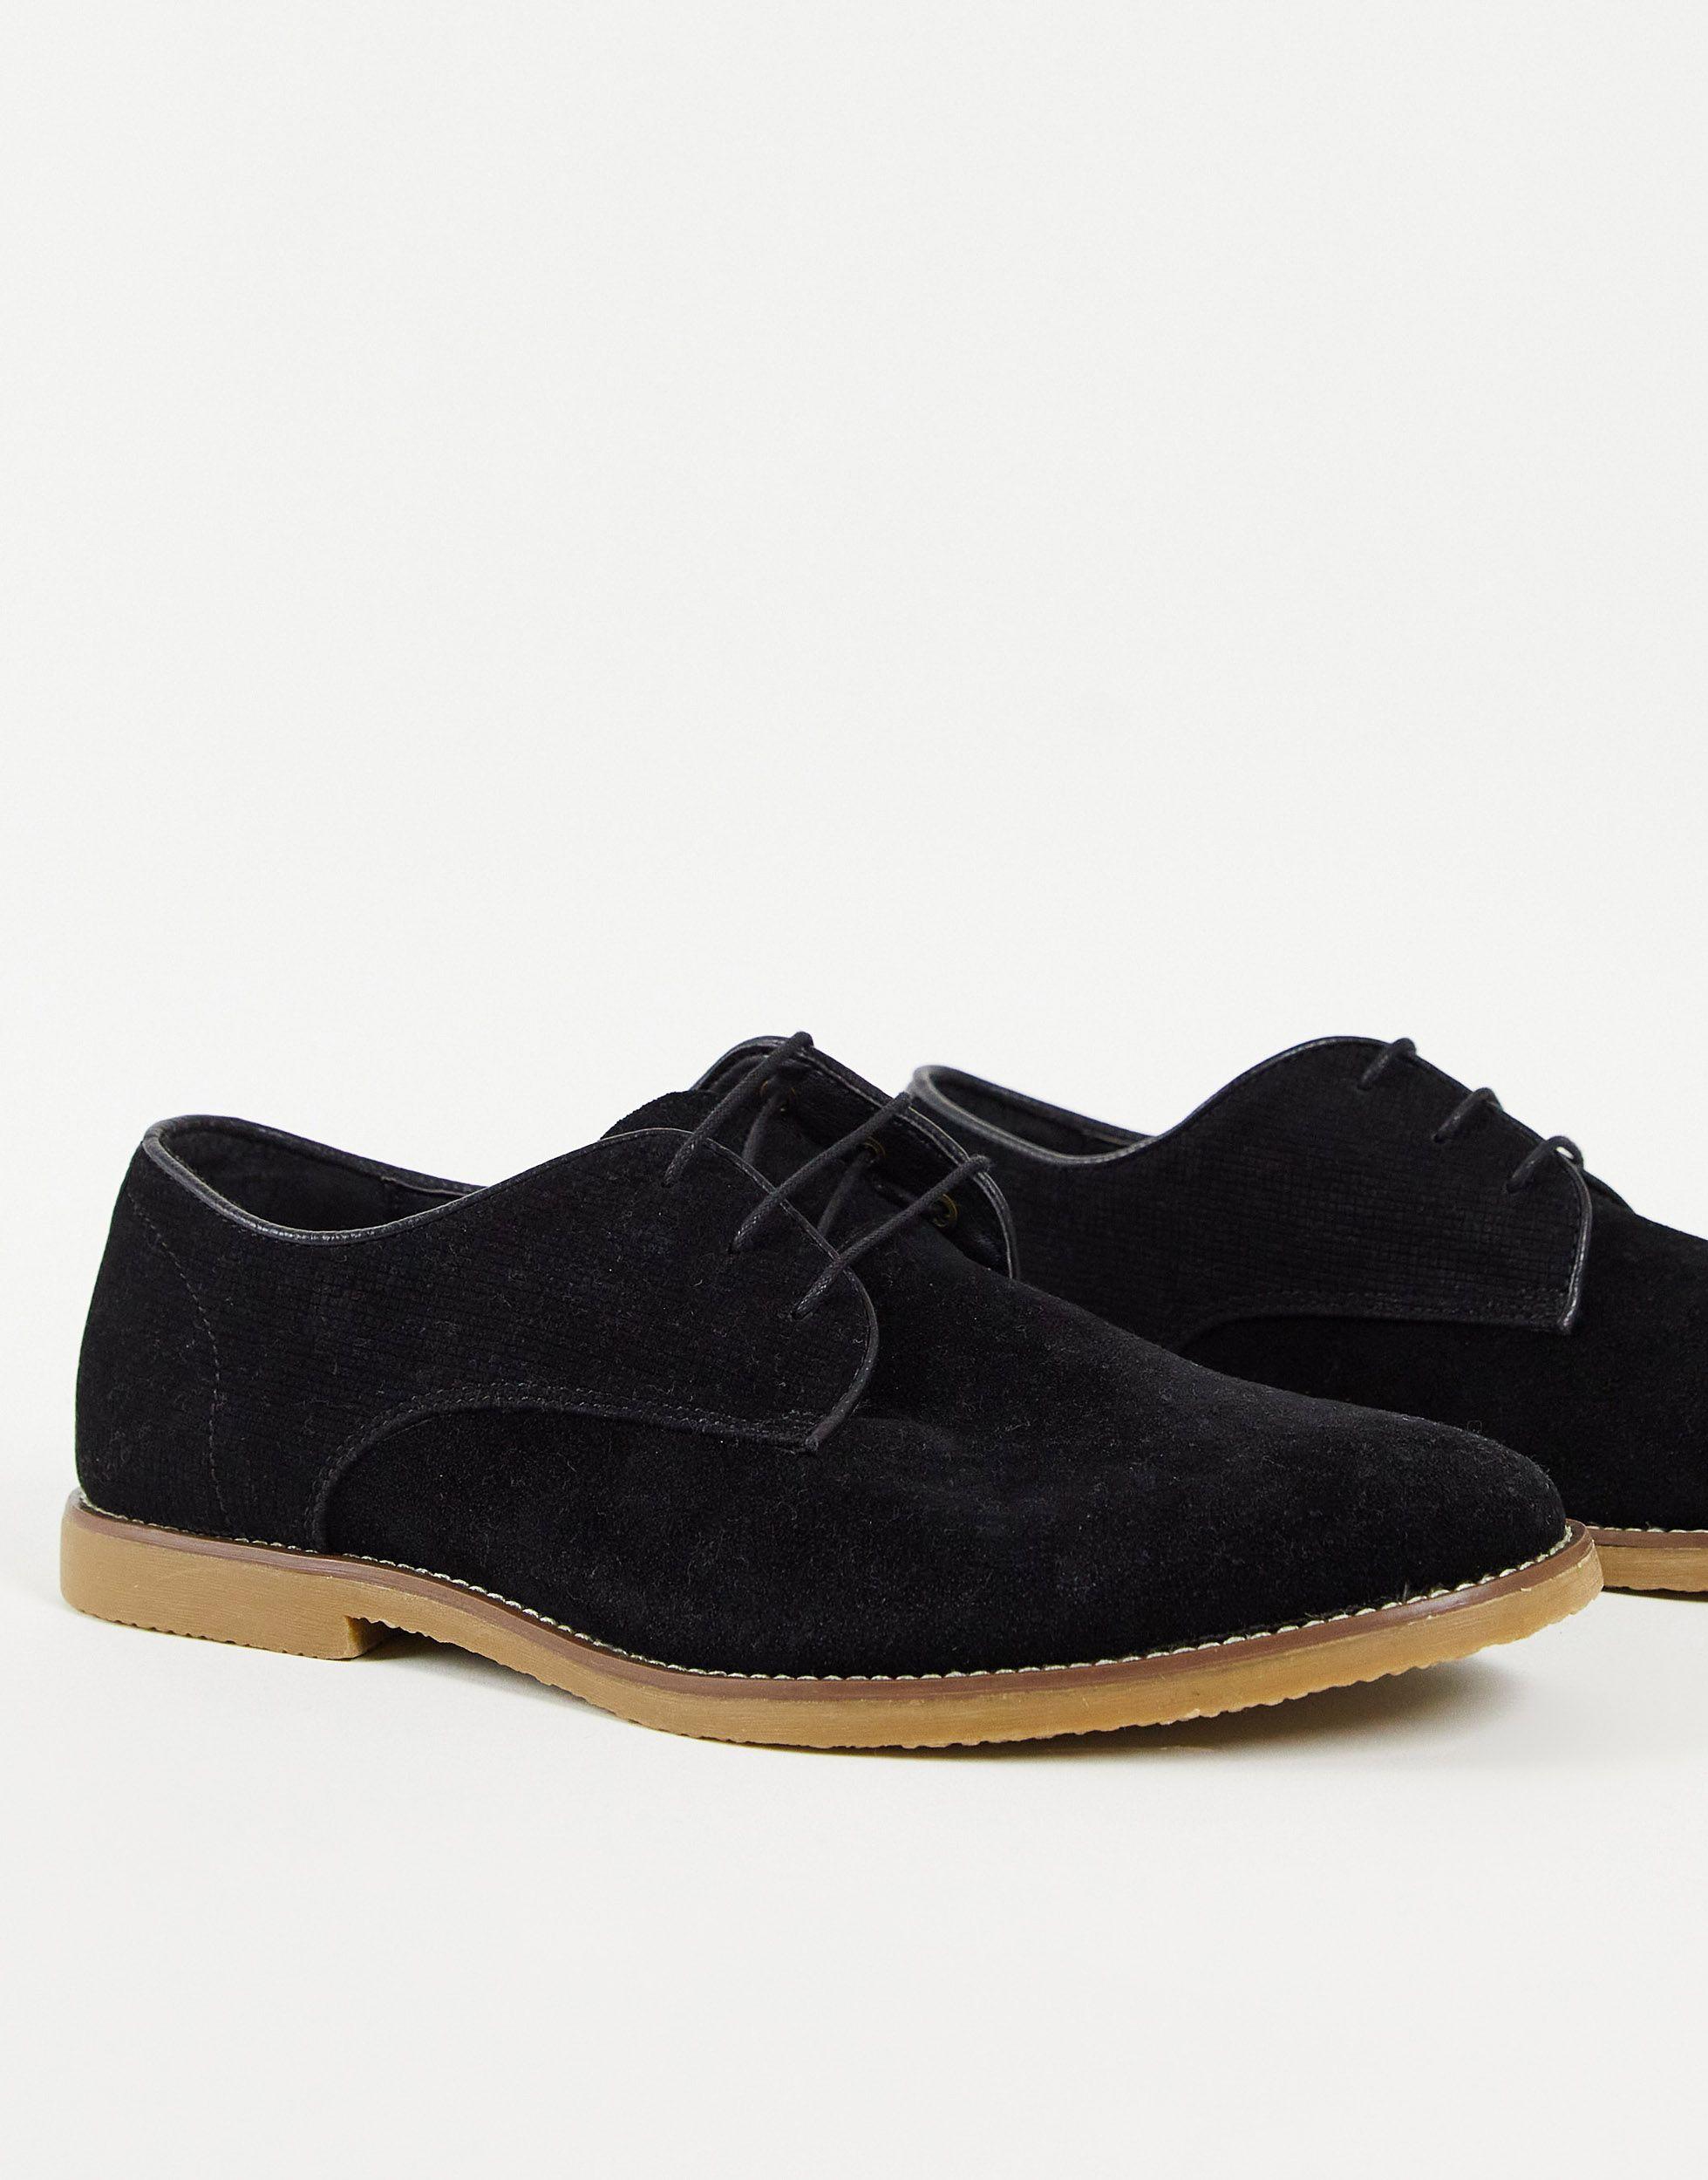 TOPMAN Faux Suede Lace Up Shoes in Black for Men | Lyst